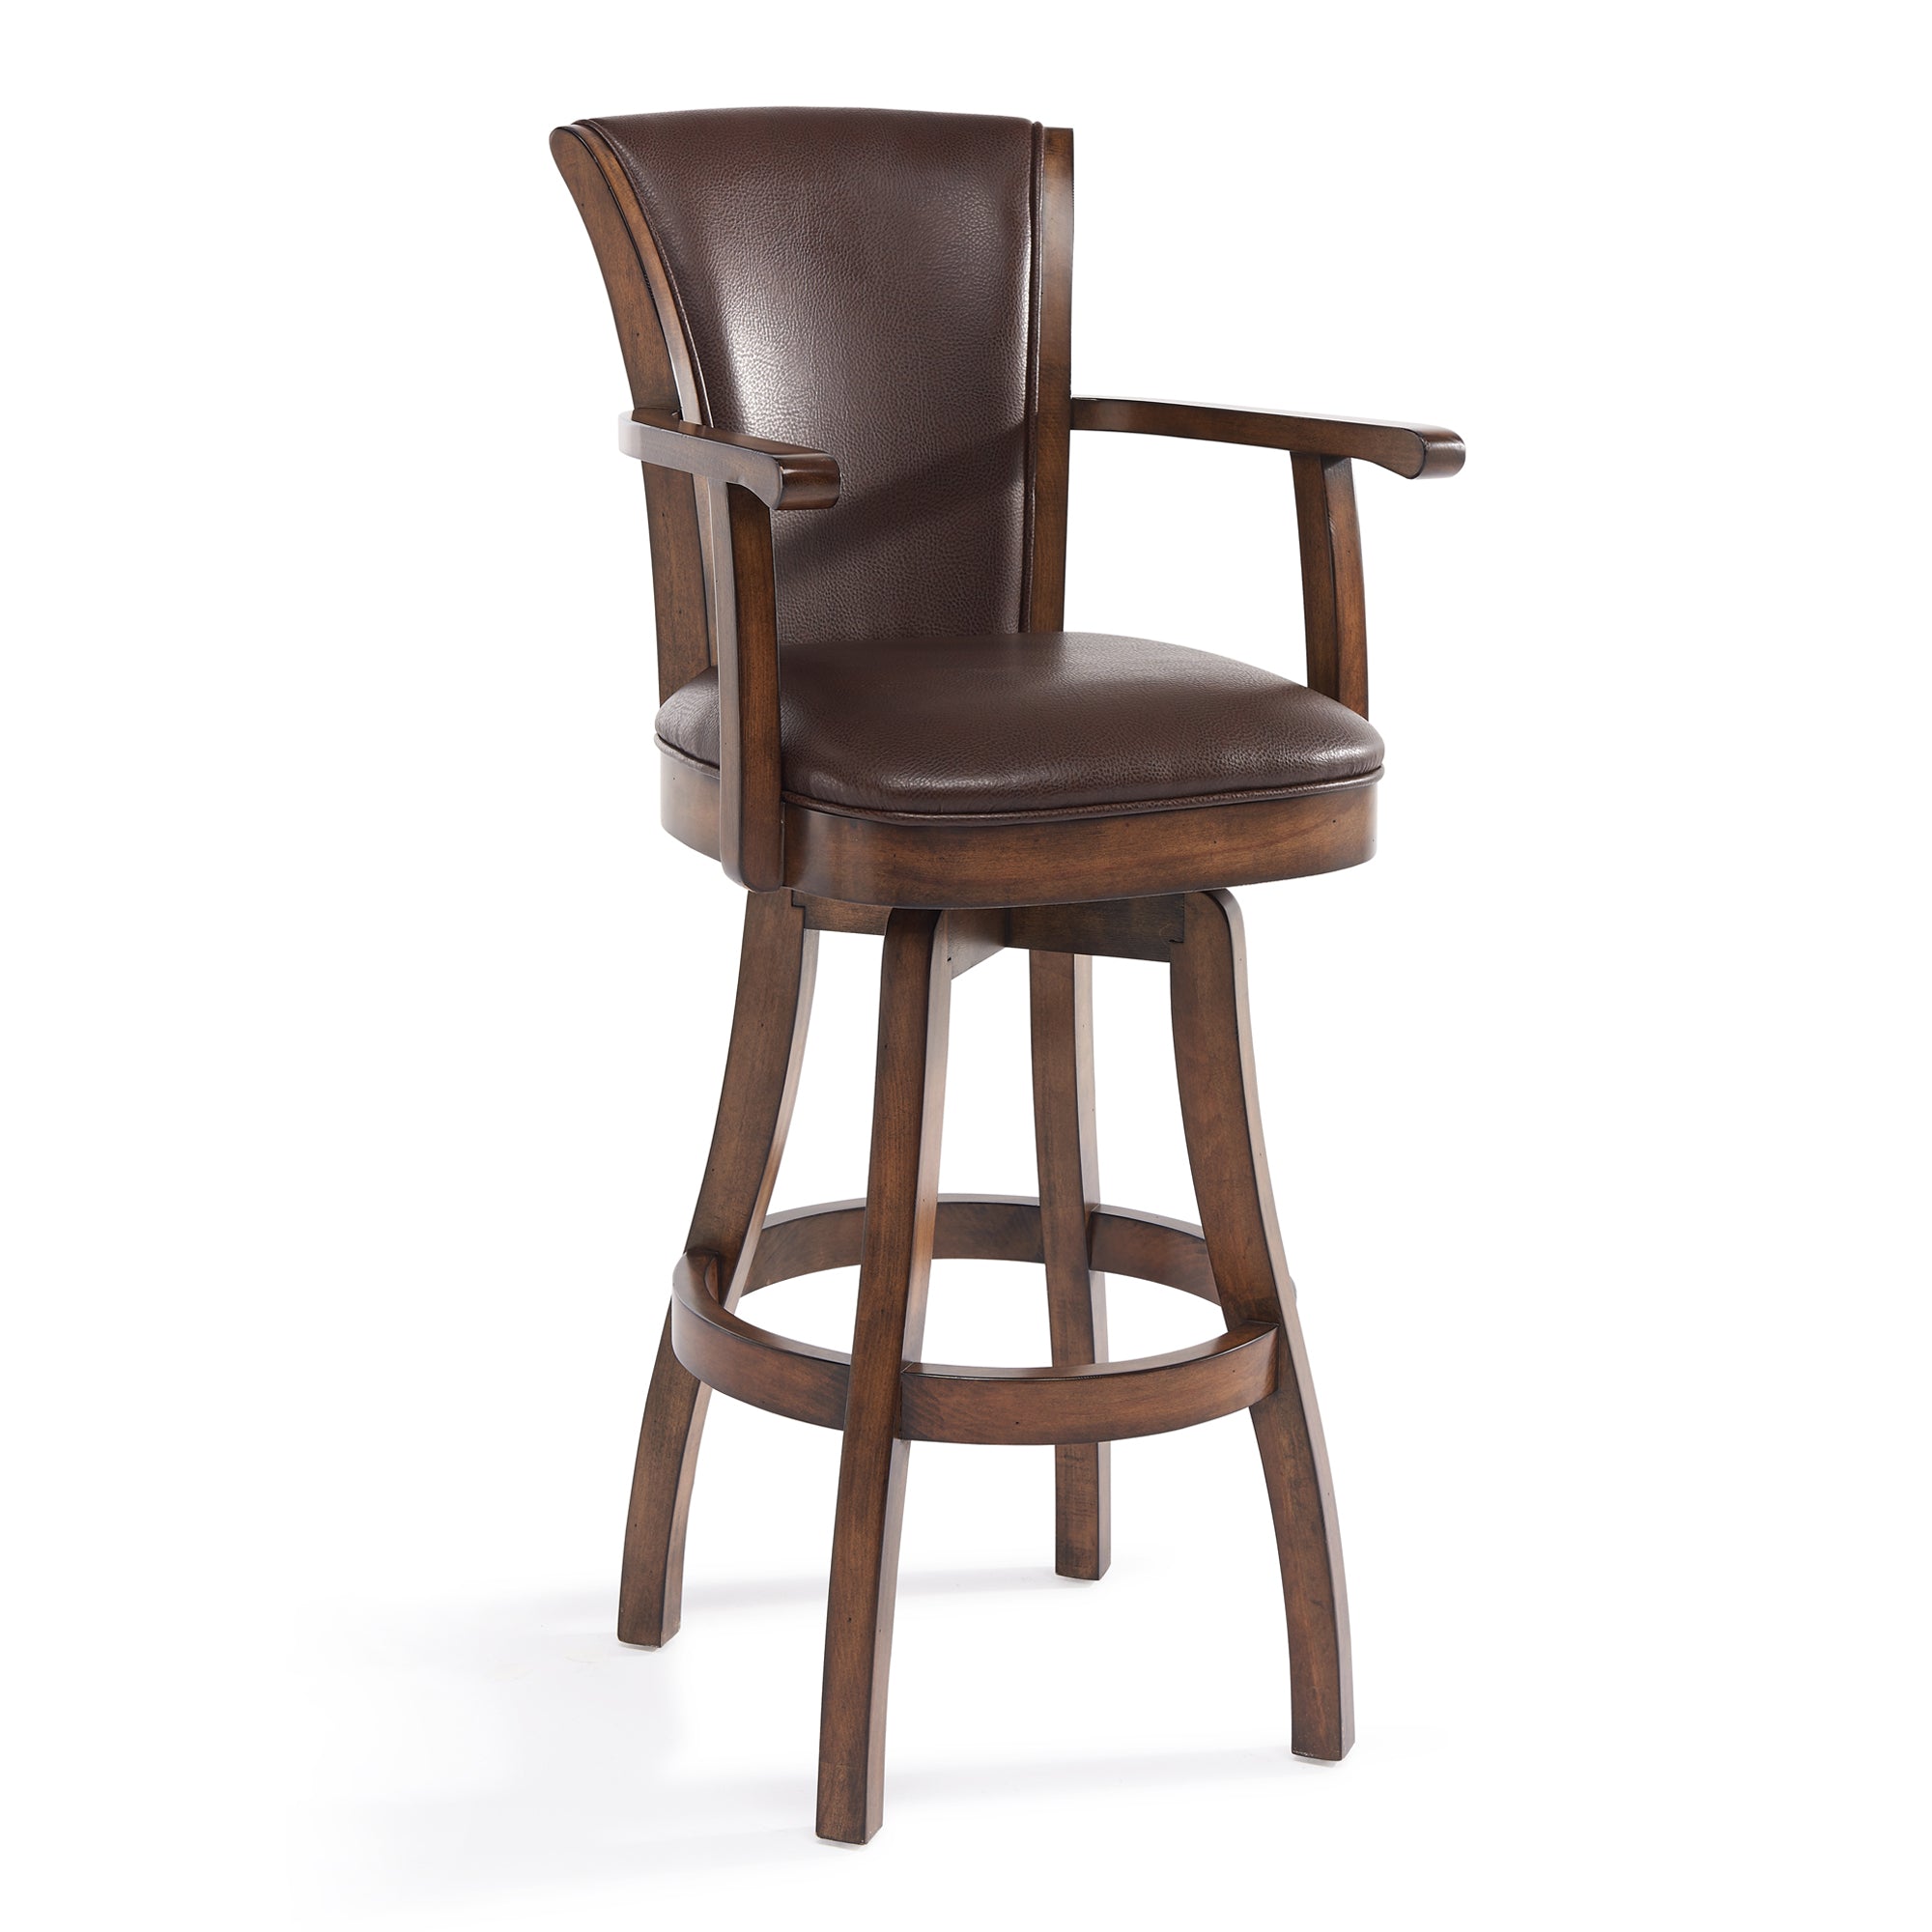 Armen Living Lcrabaarkach30 Raleigh Arm 30" Bar Height Swivel Wood Barstool In Chestnut Finish And Kahlua Faux Leather